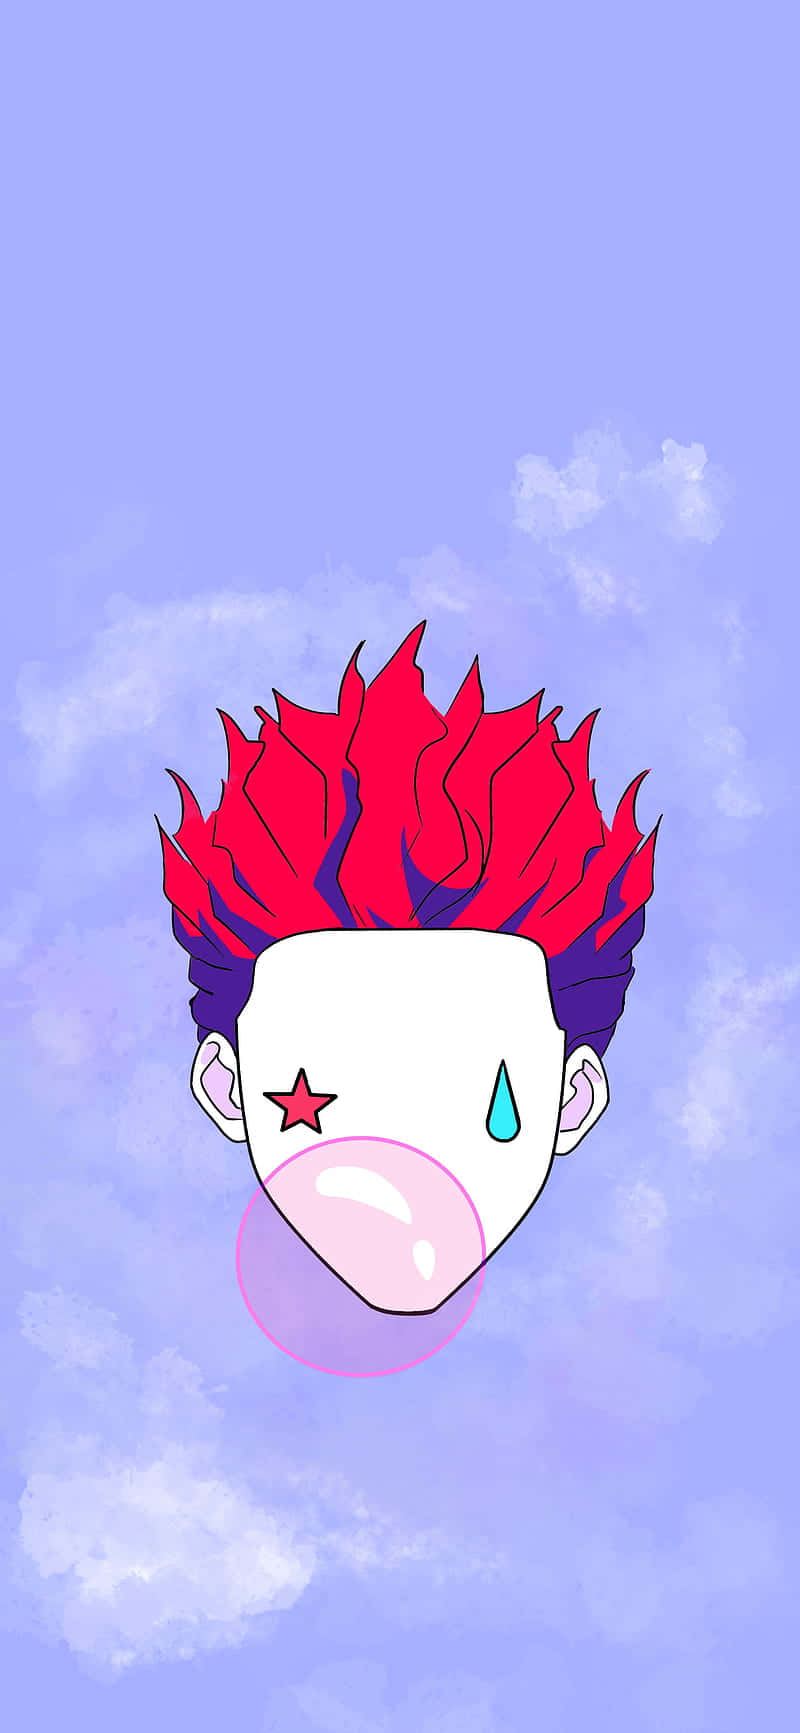 Get clarity and focus in style with the Hisoka Iphone Wallpaper